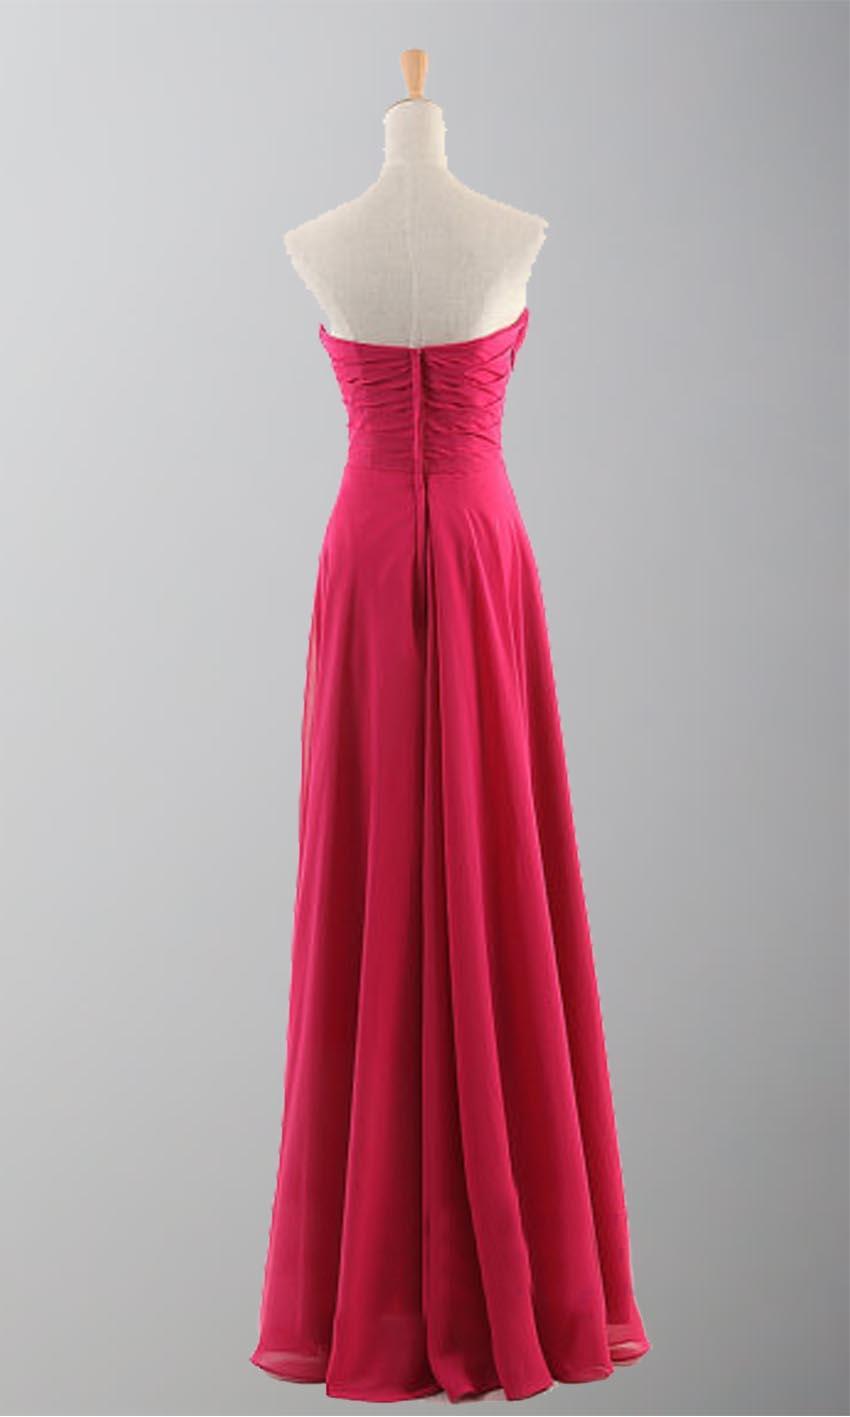 Hochzeit - Flame Sweetheart Empire Waist Long Prom Dresses KSP172 [KSP172] - £84.00 : Cheap Prom Dresses Uk, Bridesmaid Dresses, 2014 Prom & Evening Dresses, Look for cheap elegant prom dresses 2014, cocktail gowns, or dresses for special occasions? kissprom.co.uk o